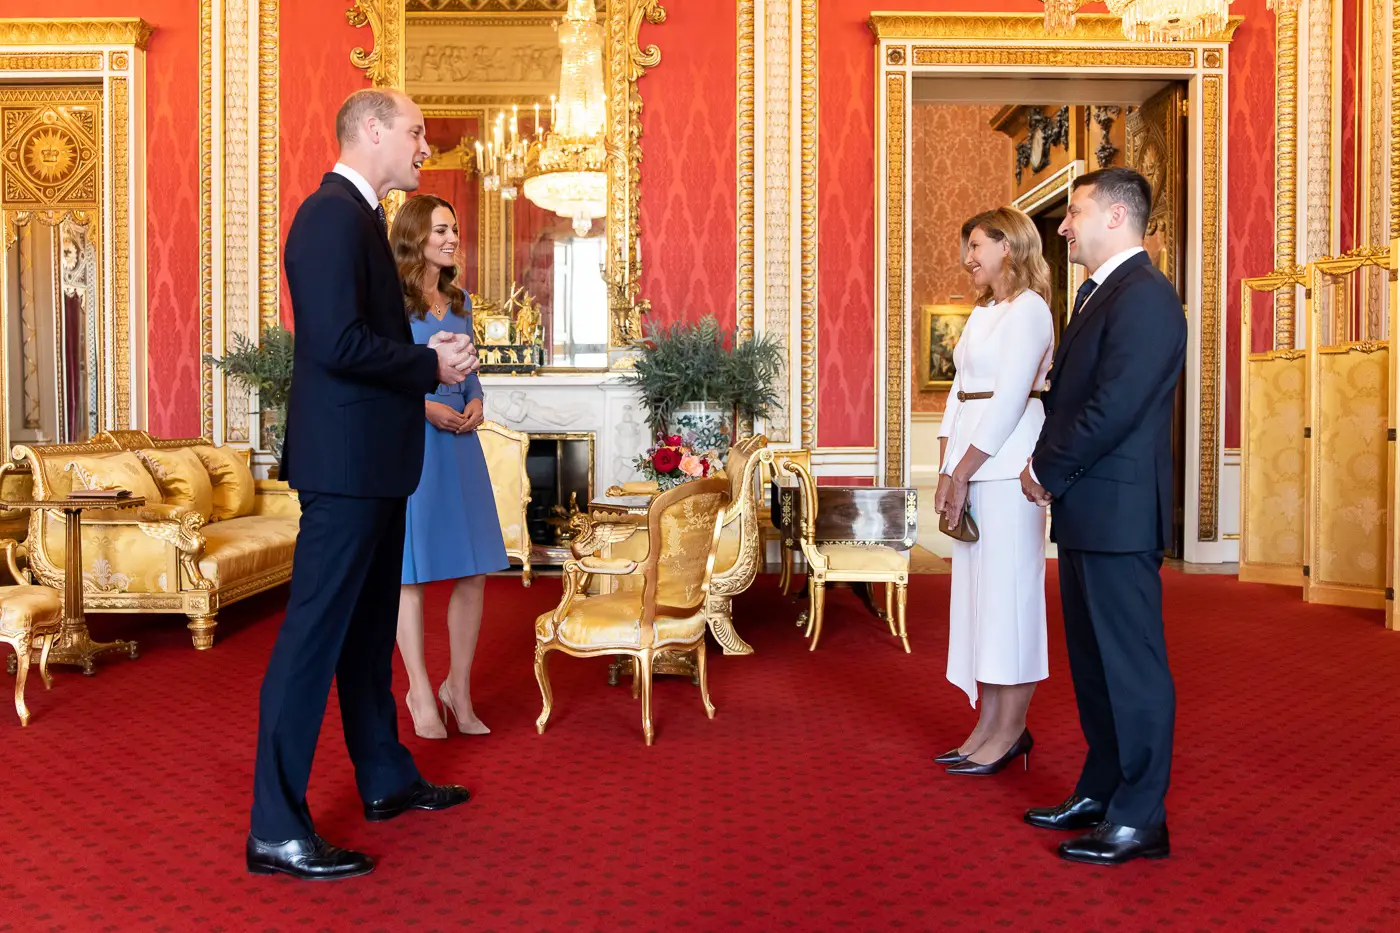 The Duke and Duchess of Cambridge welcomed Ukraine President and First Lady